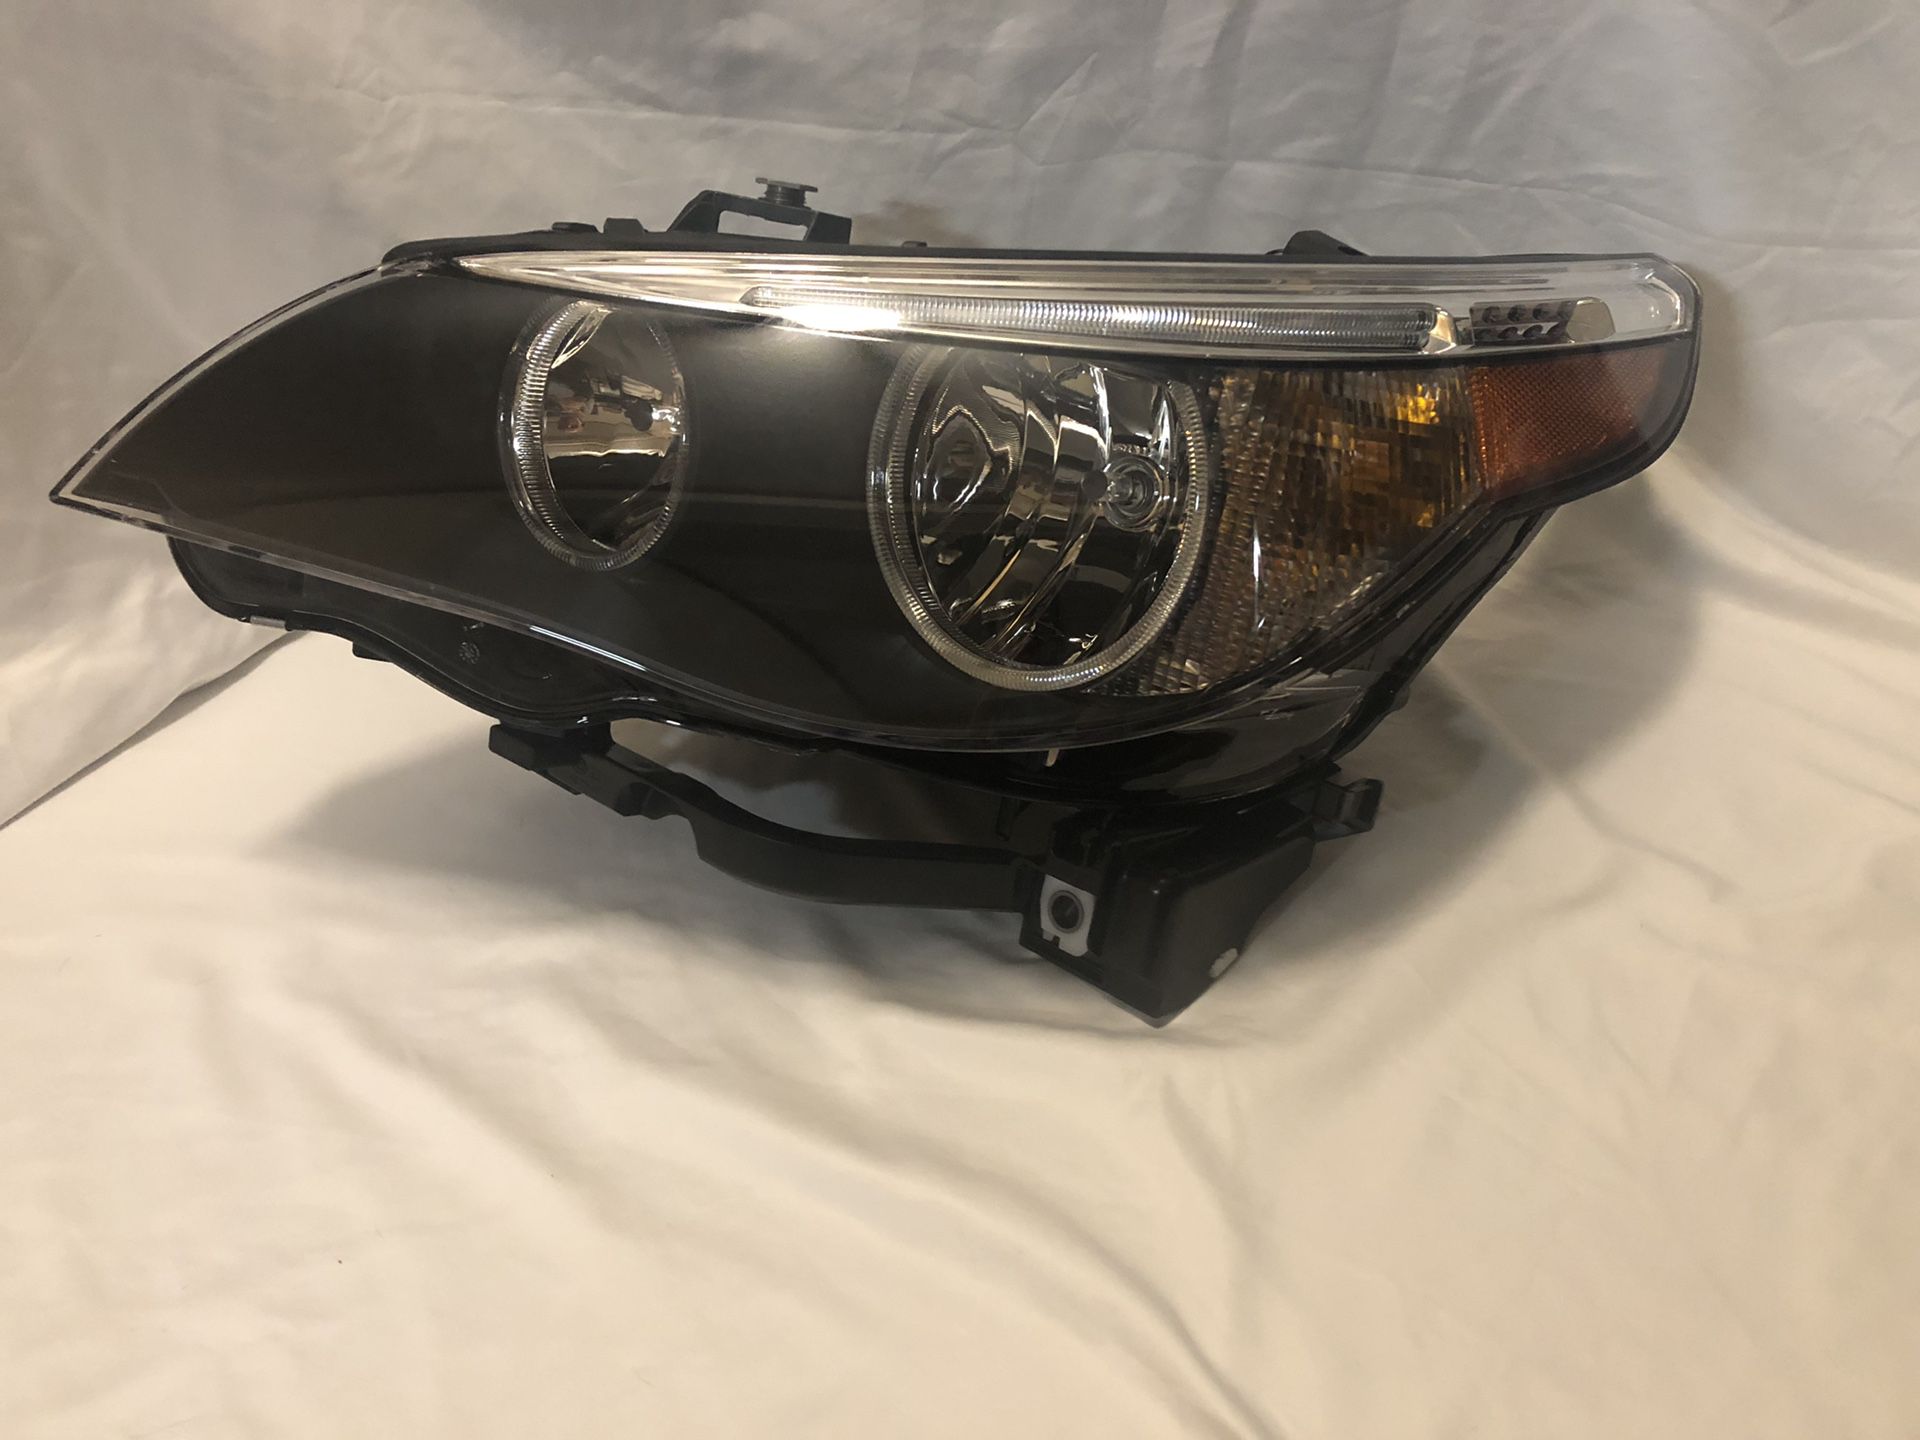 Genuine OEM HELLA Left Side Headlight Assembly for BMW E60 5 Series